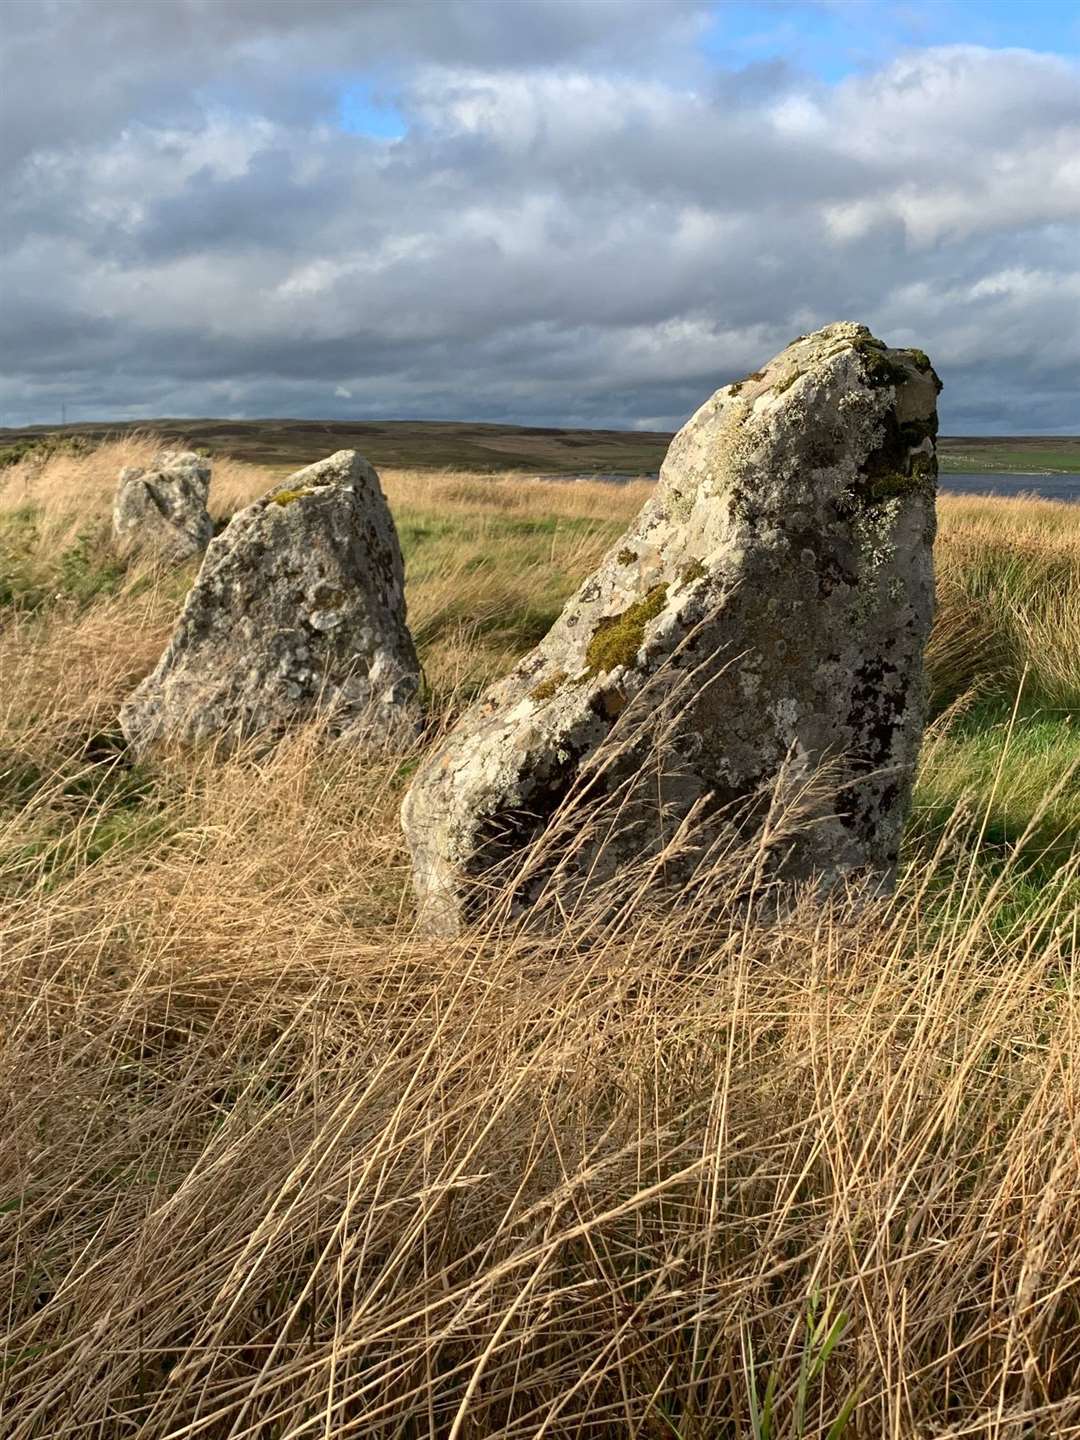 Achavanich standing stones - both writers shared a fascination in our pre-history.